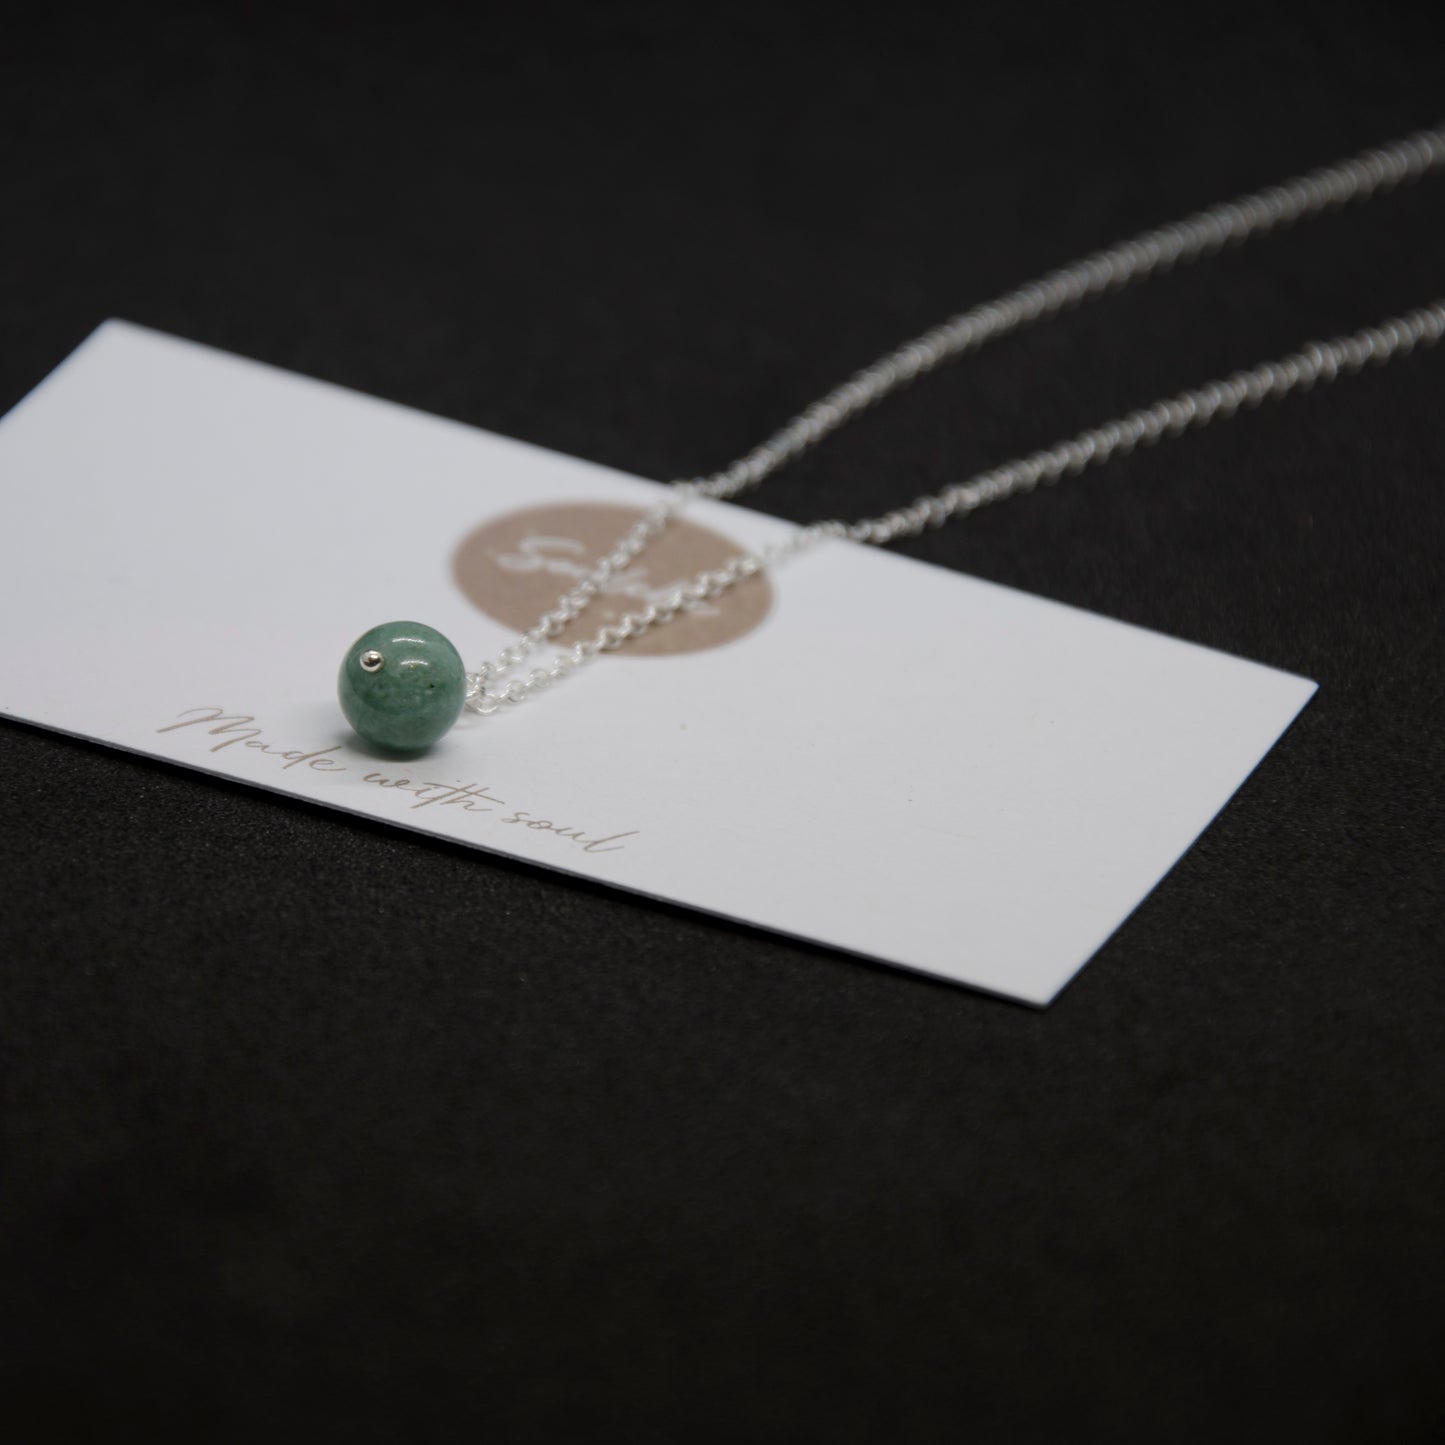 Jade Stone Necklace | Jade Crystal Necklace | Soulehe